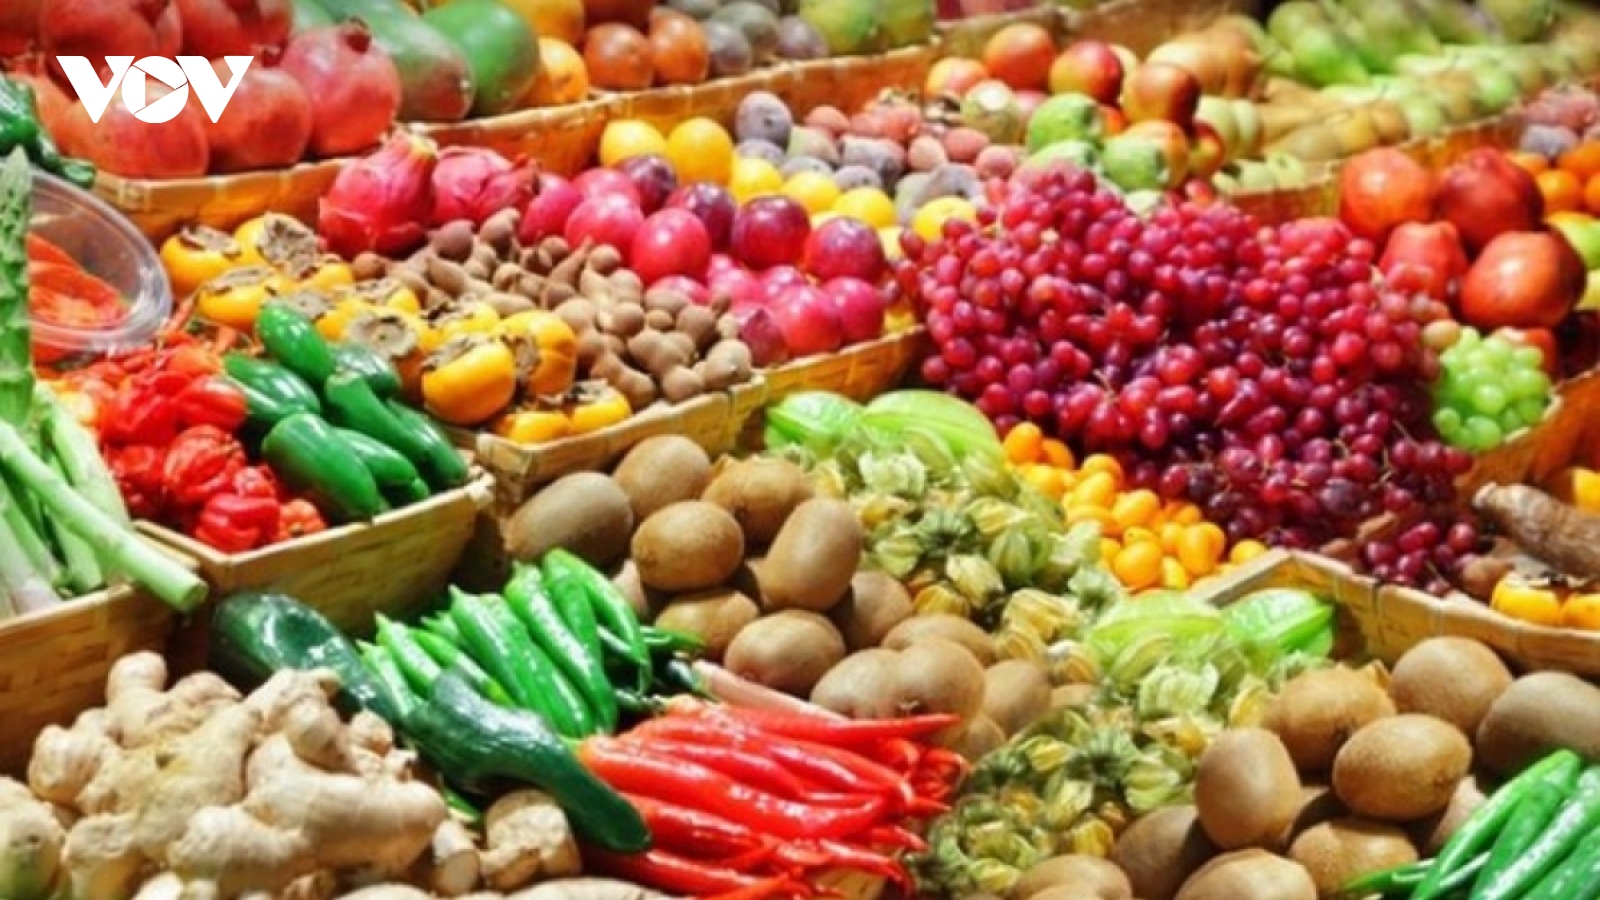 UK represents a potential export market for Vietnamese fruit and vegetables